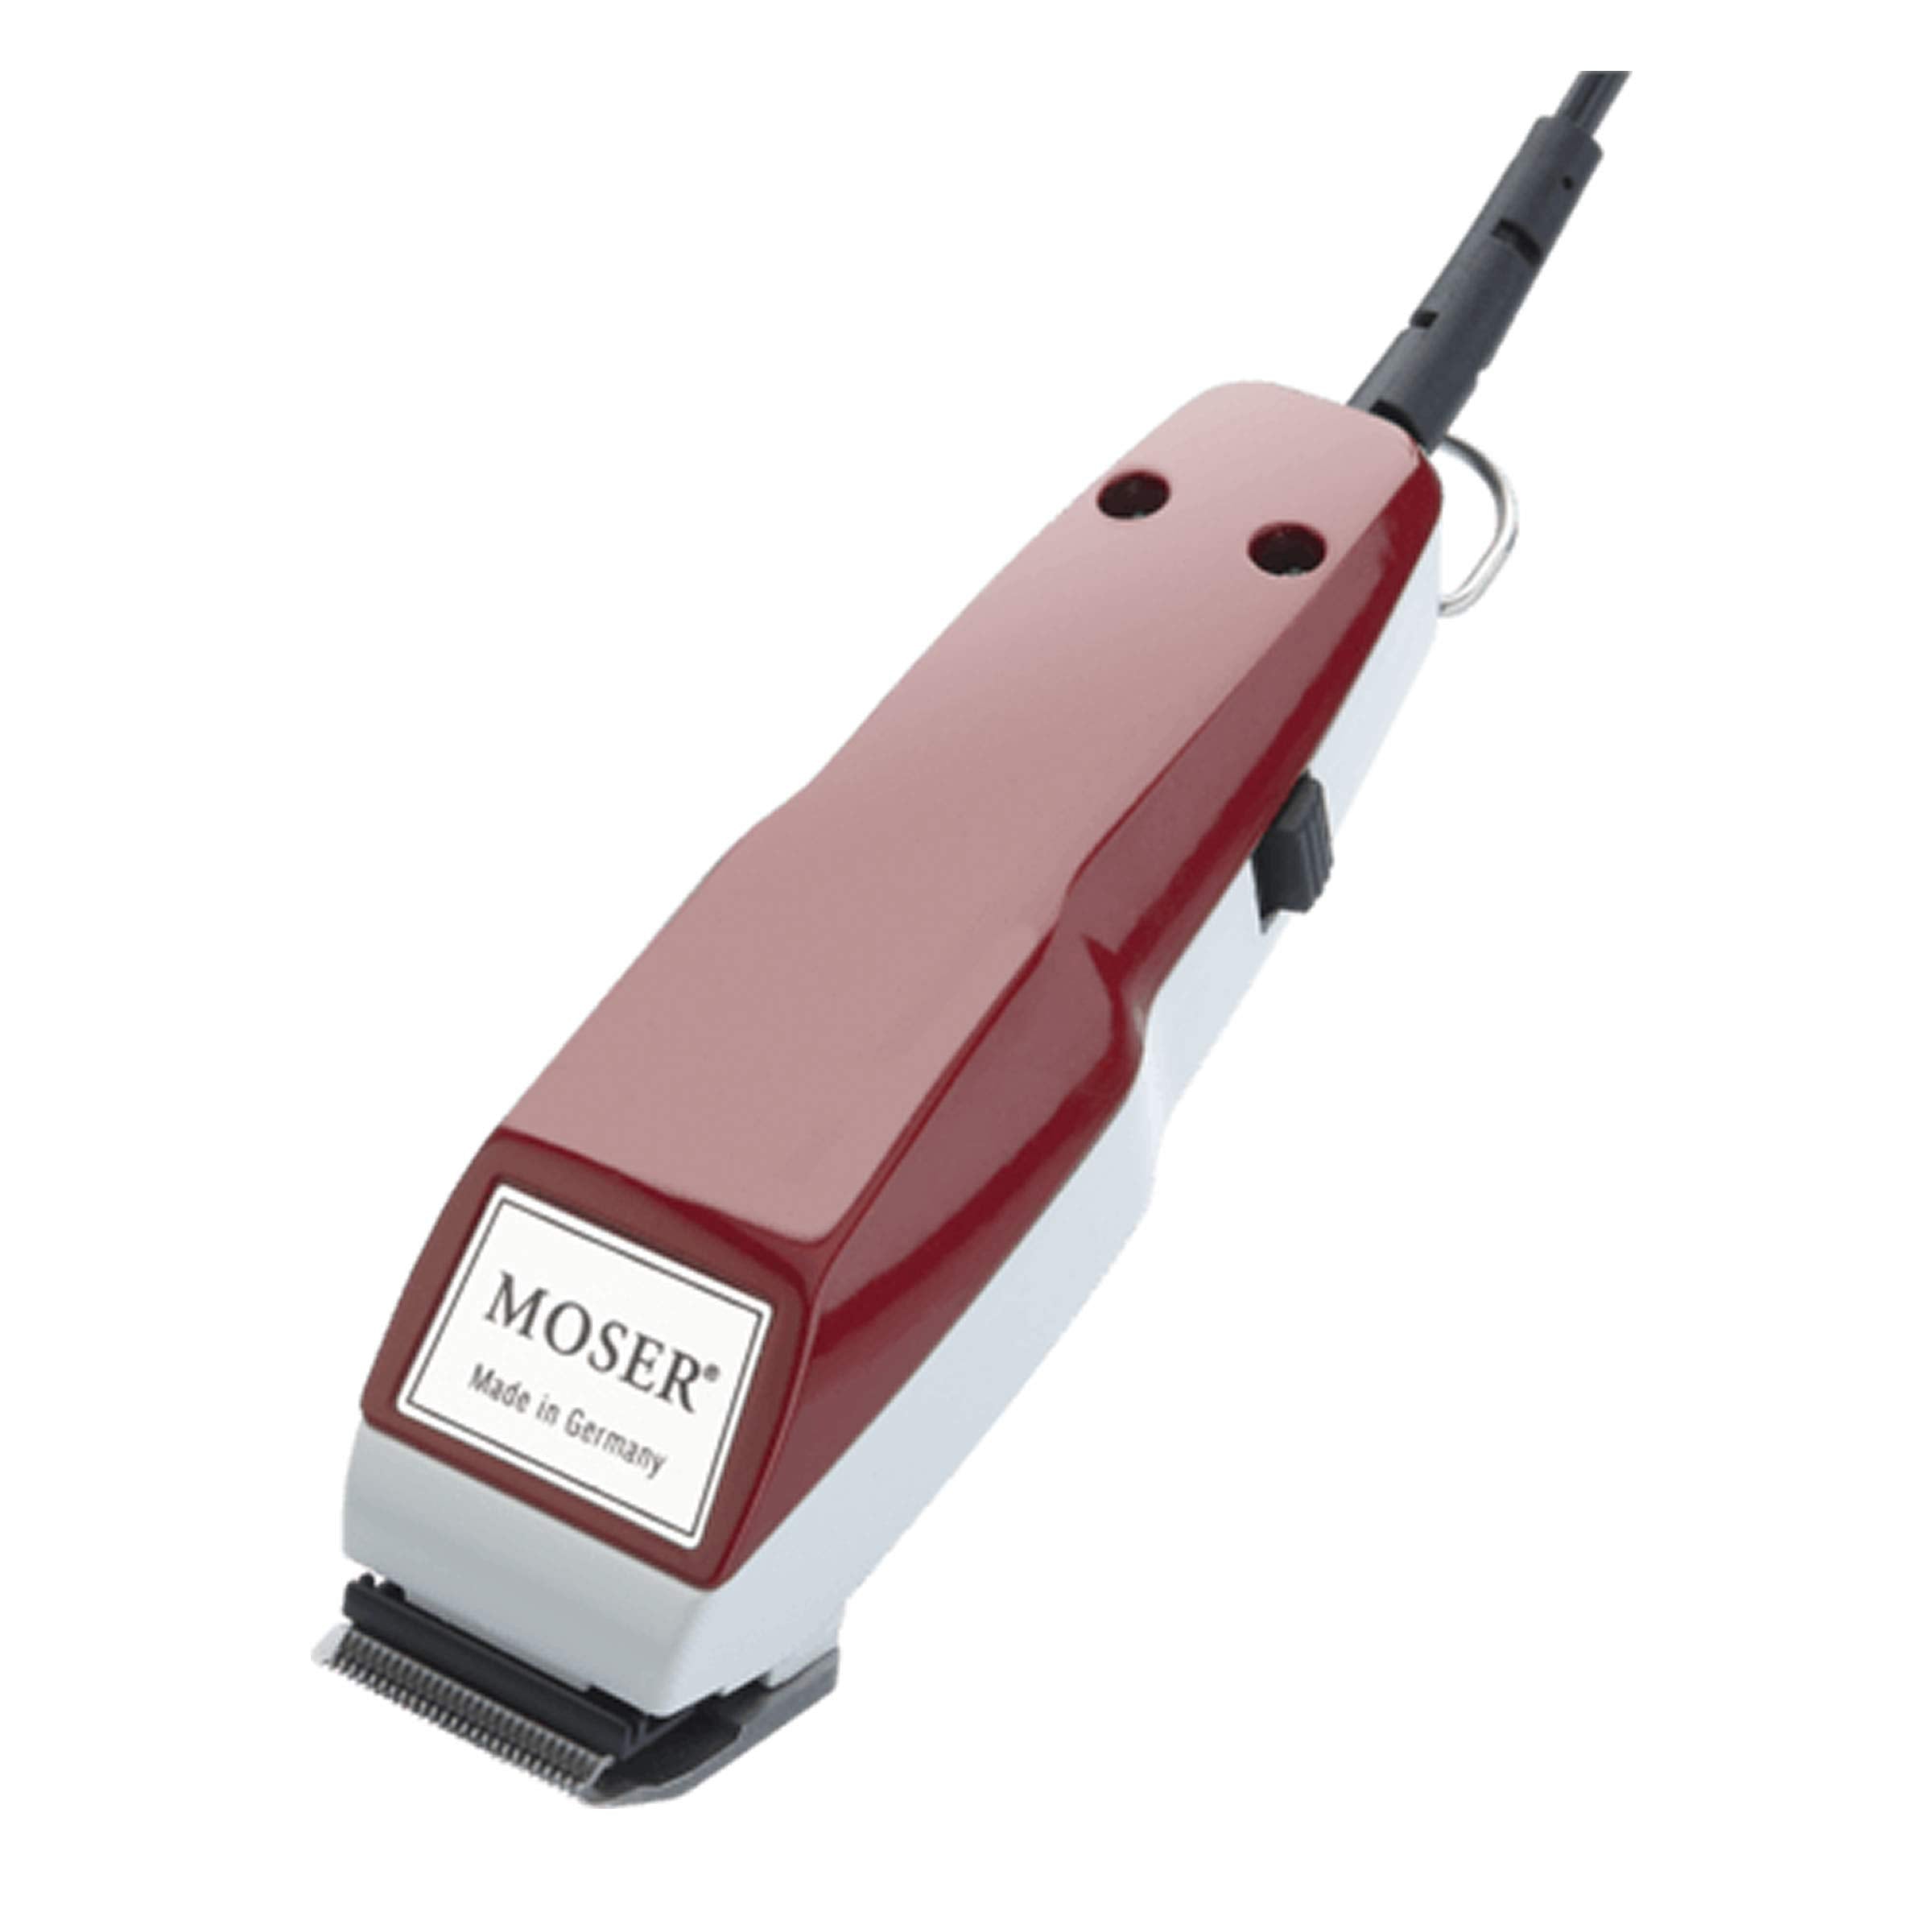 Moser 1411-0150, 1400 Mini Professional Corded Trimmer, Burgundy, Small